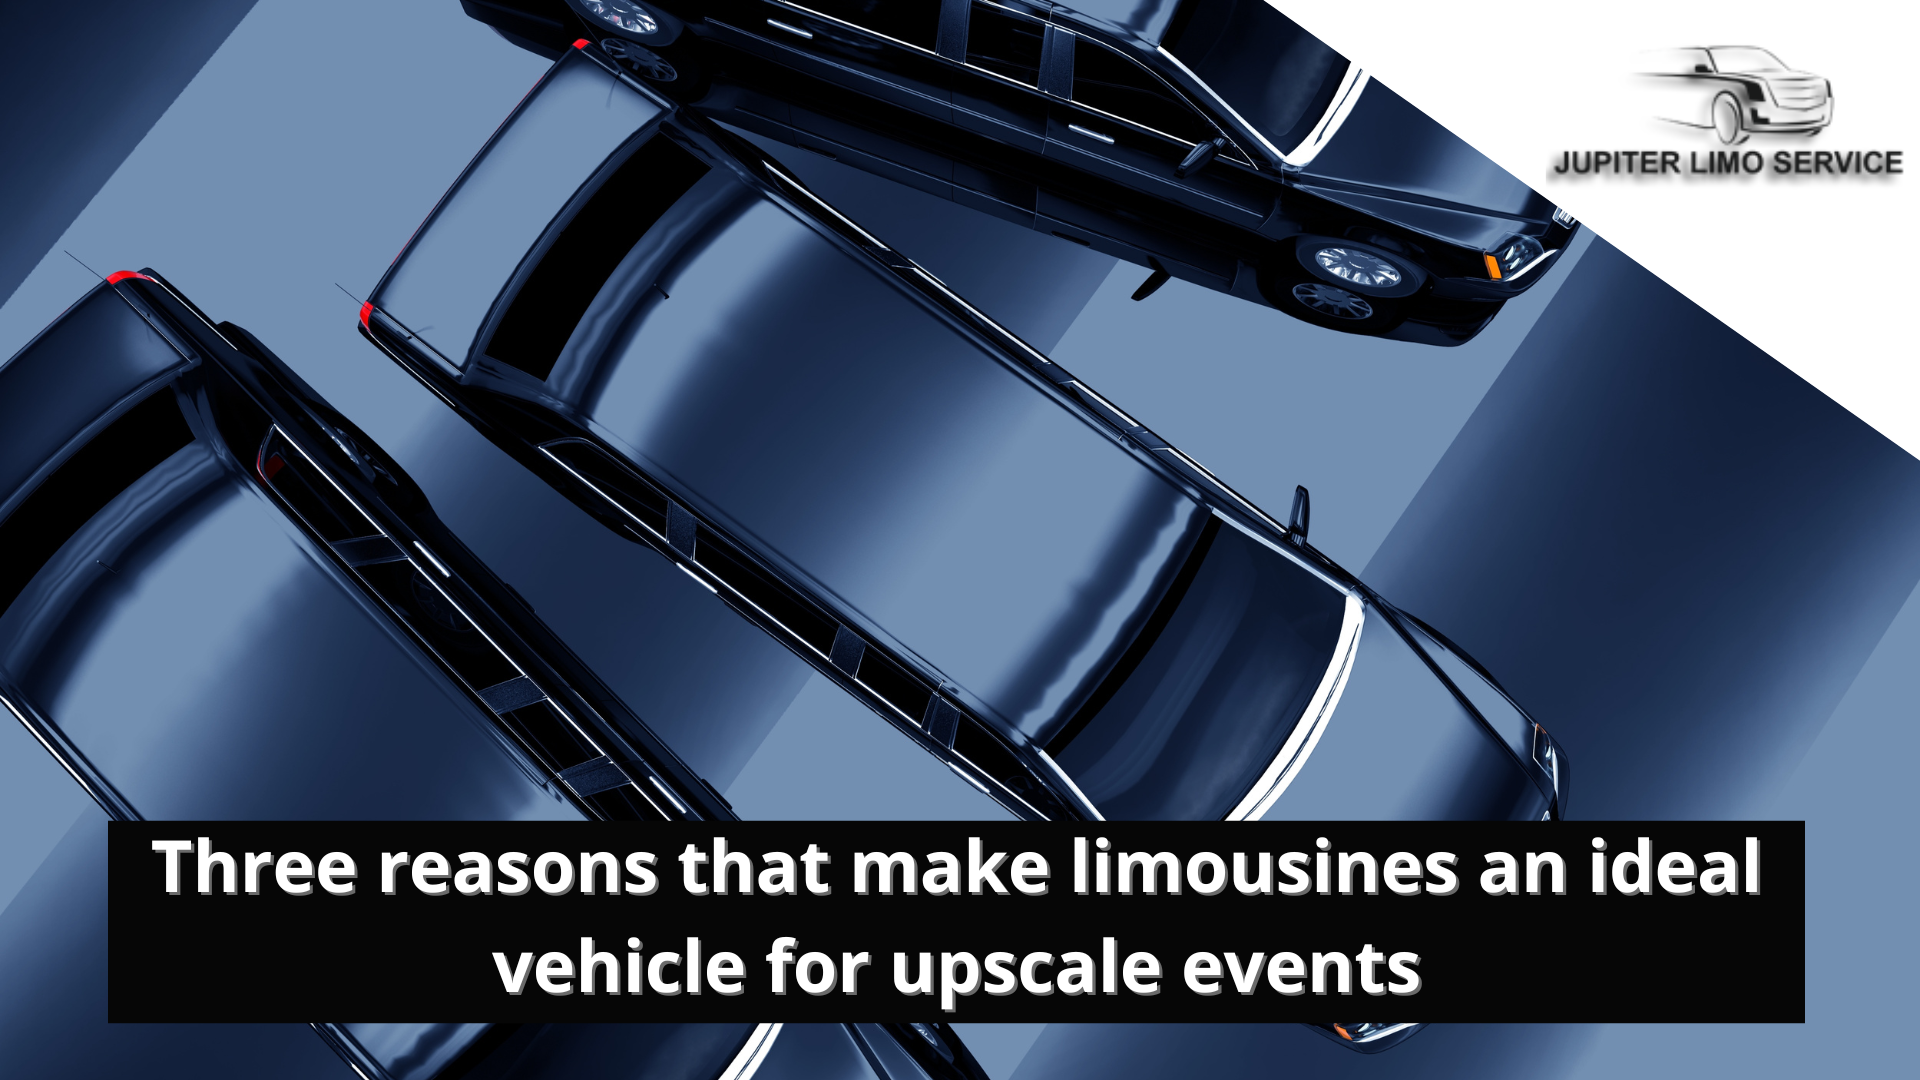 Three reasons that make limousines an ideal vehicle for upscale events